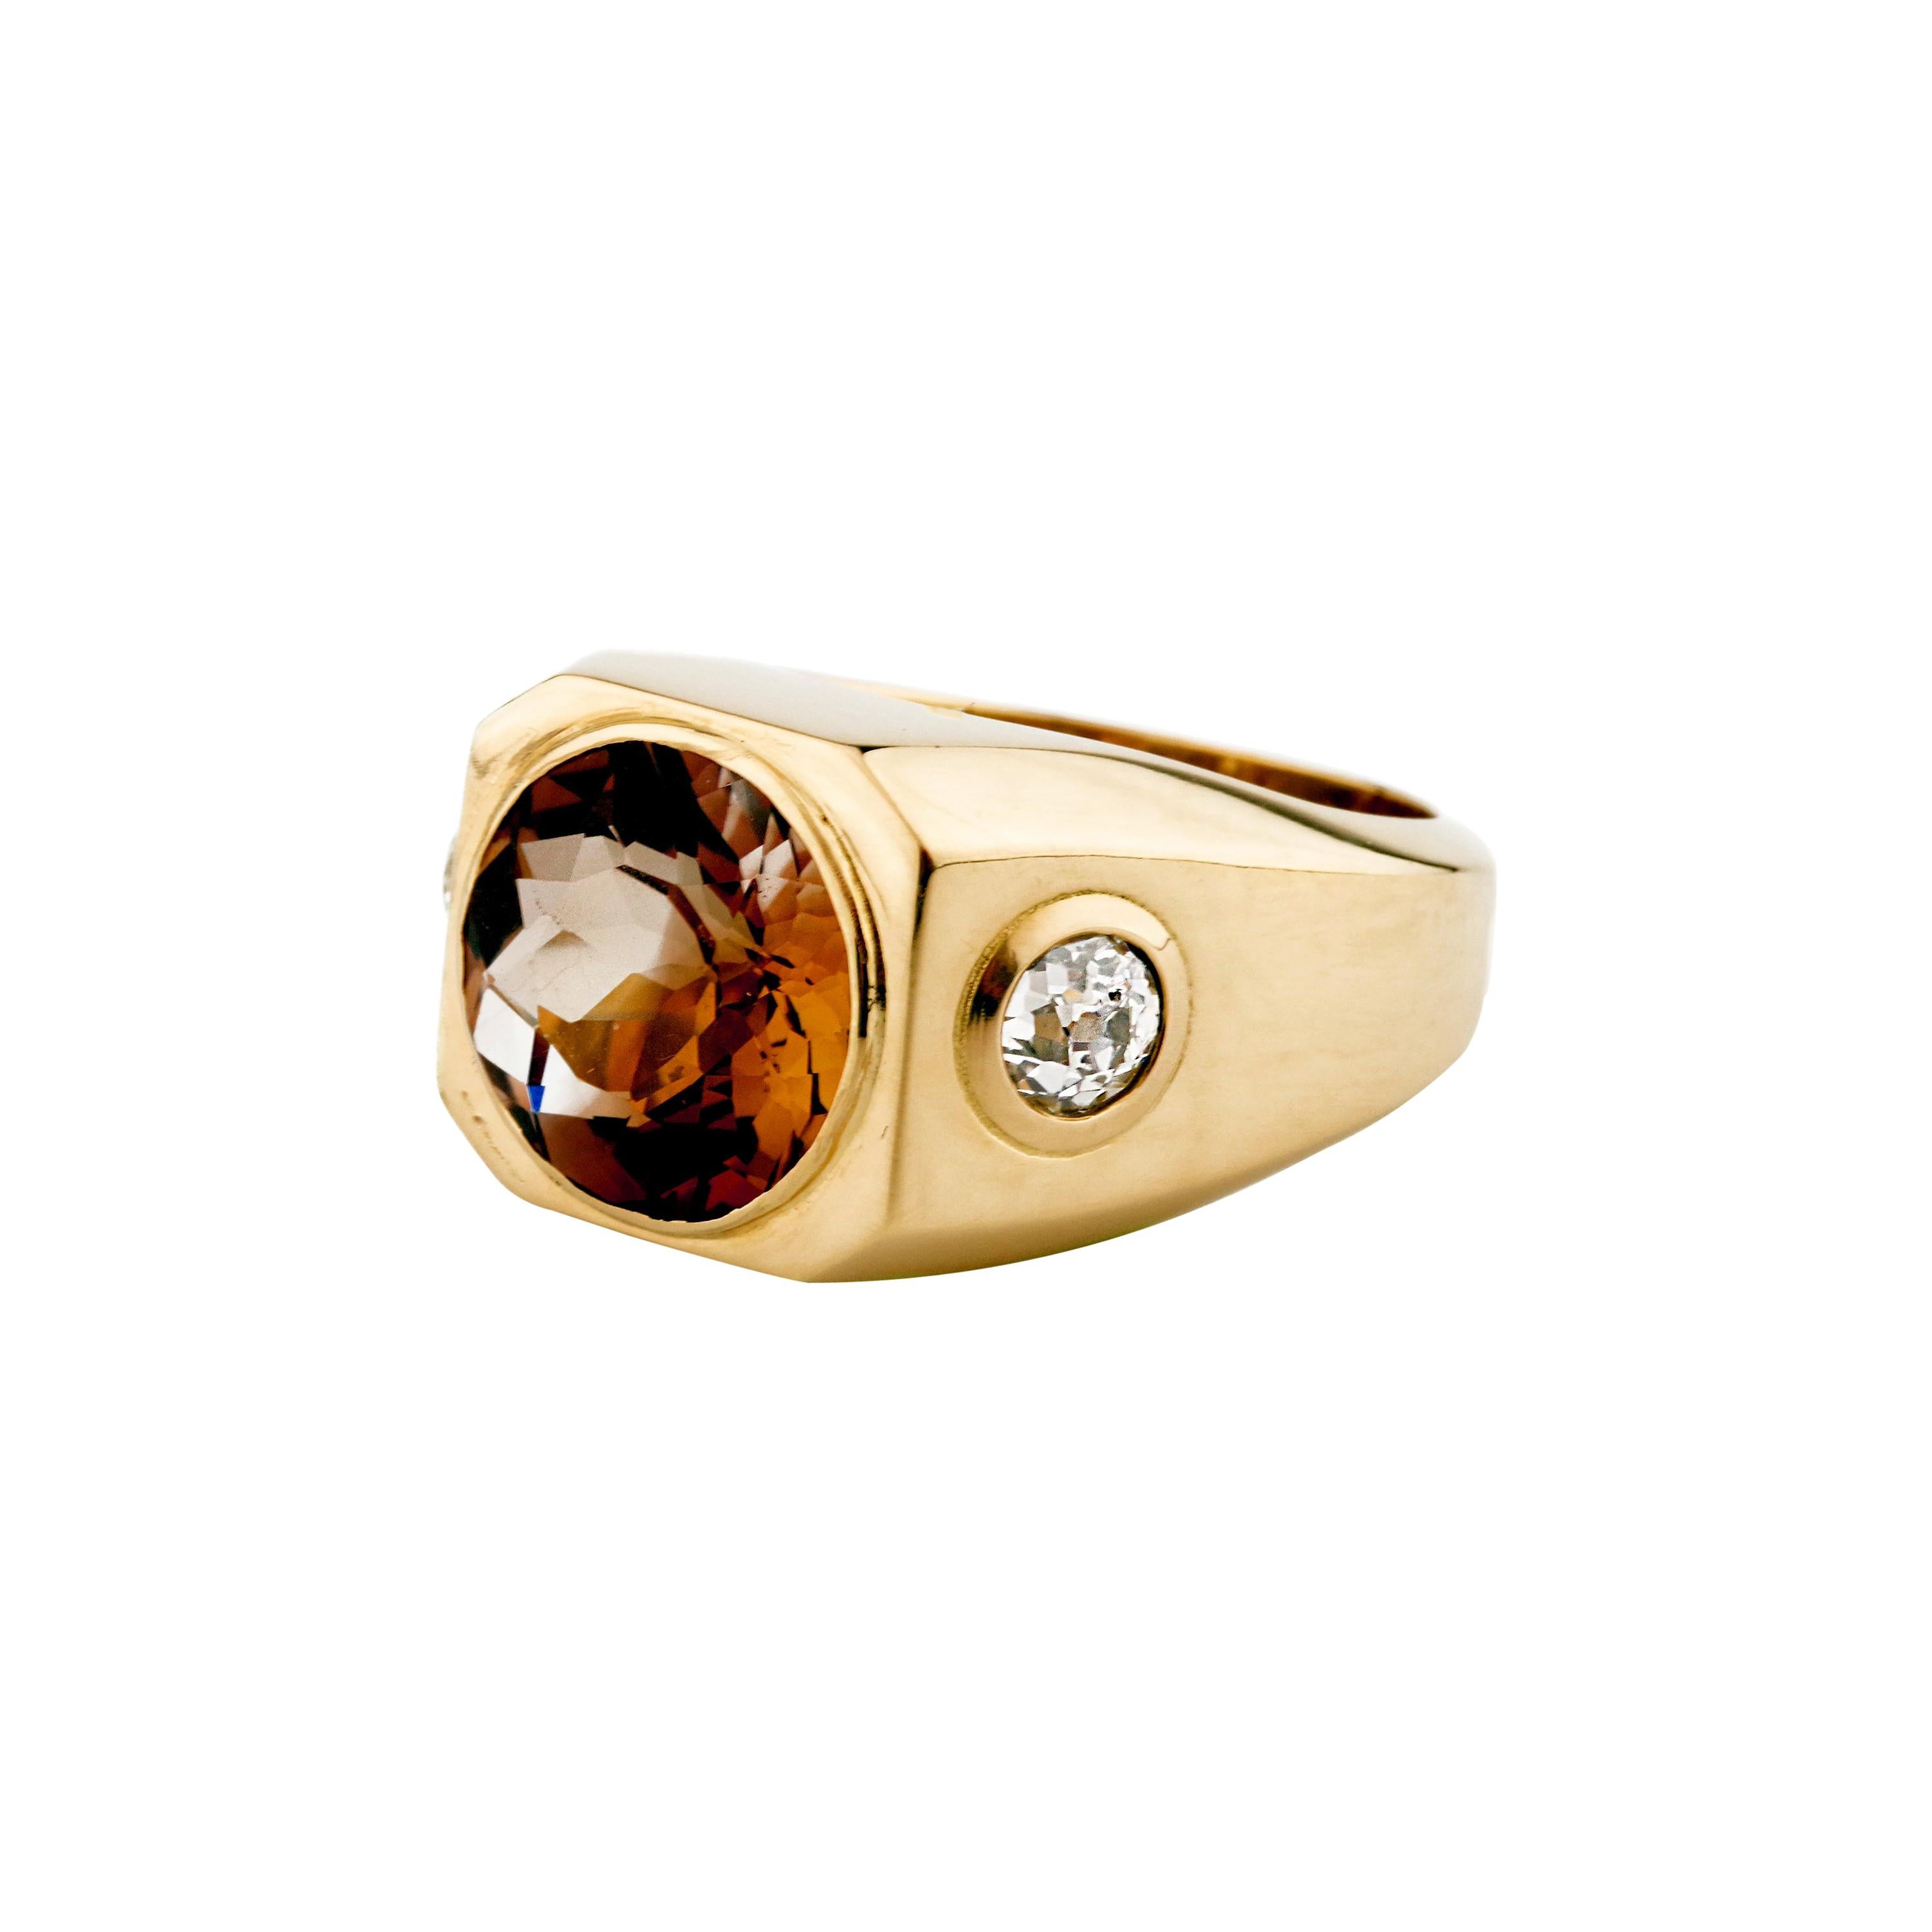 Men's Precious Topaz Ring in Whiskey is Ruggedly Handsome